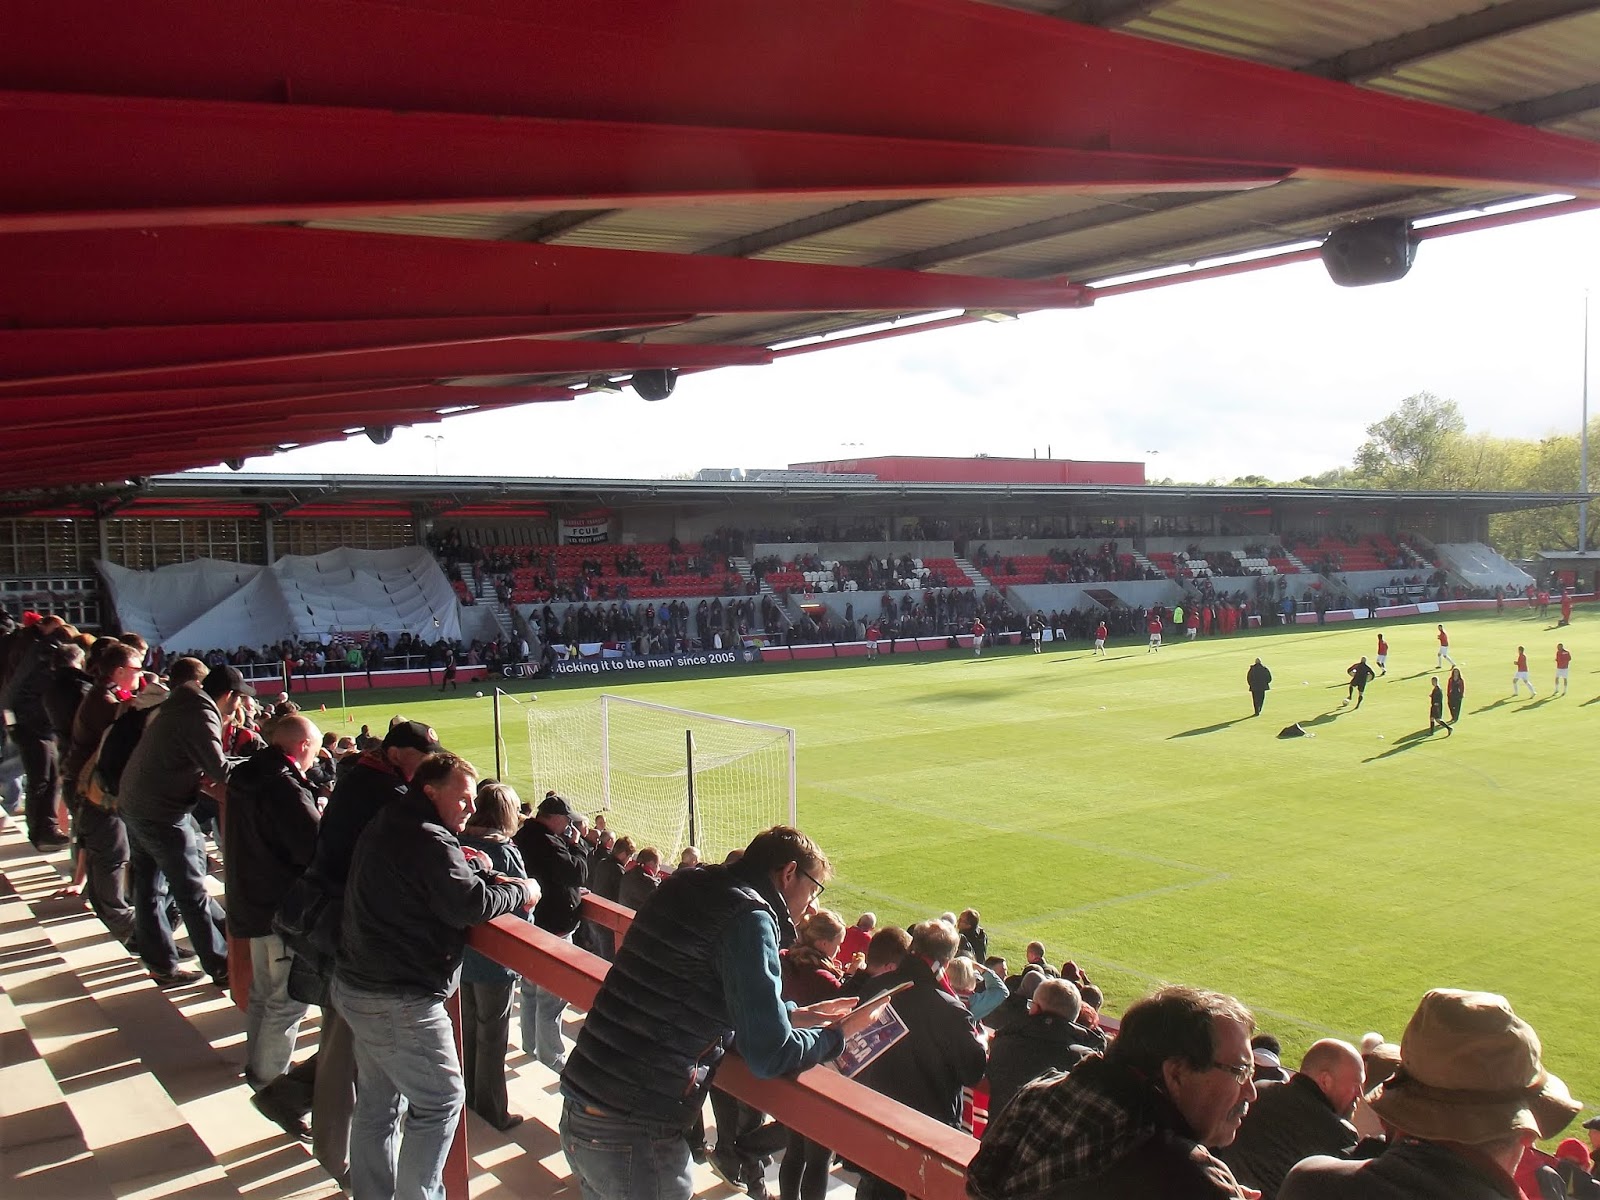 A Behind The Scenes Visit To Broadhurst Park For FC United Of Manchester 1 Altrincham  FC 2 (1116) – Welcome To My World